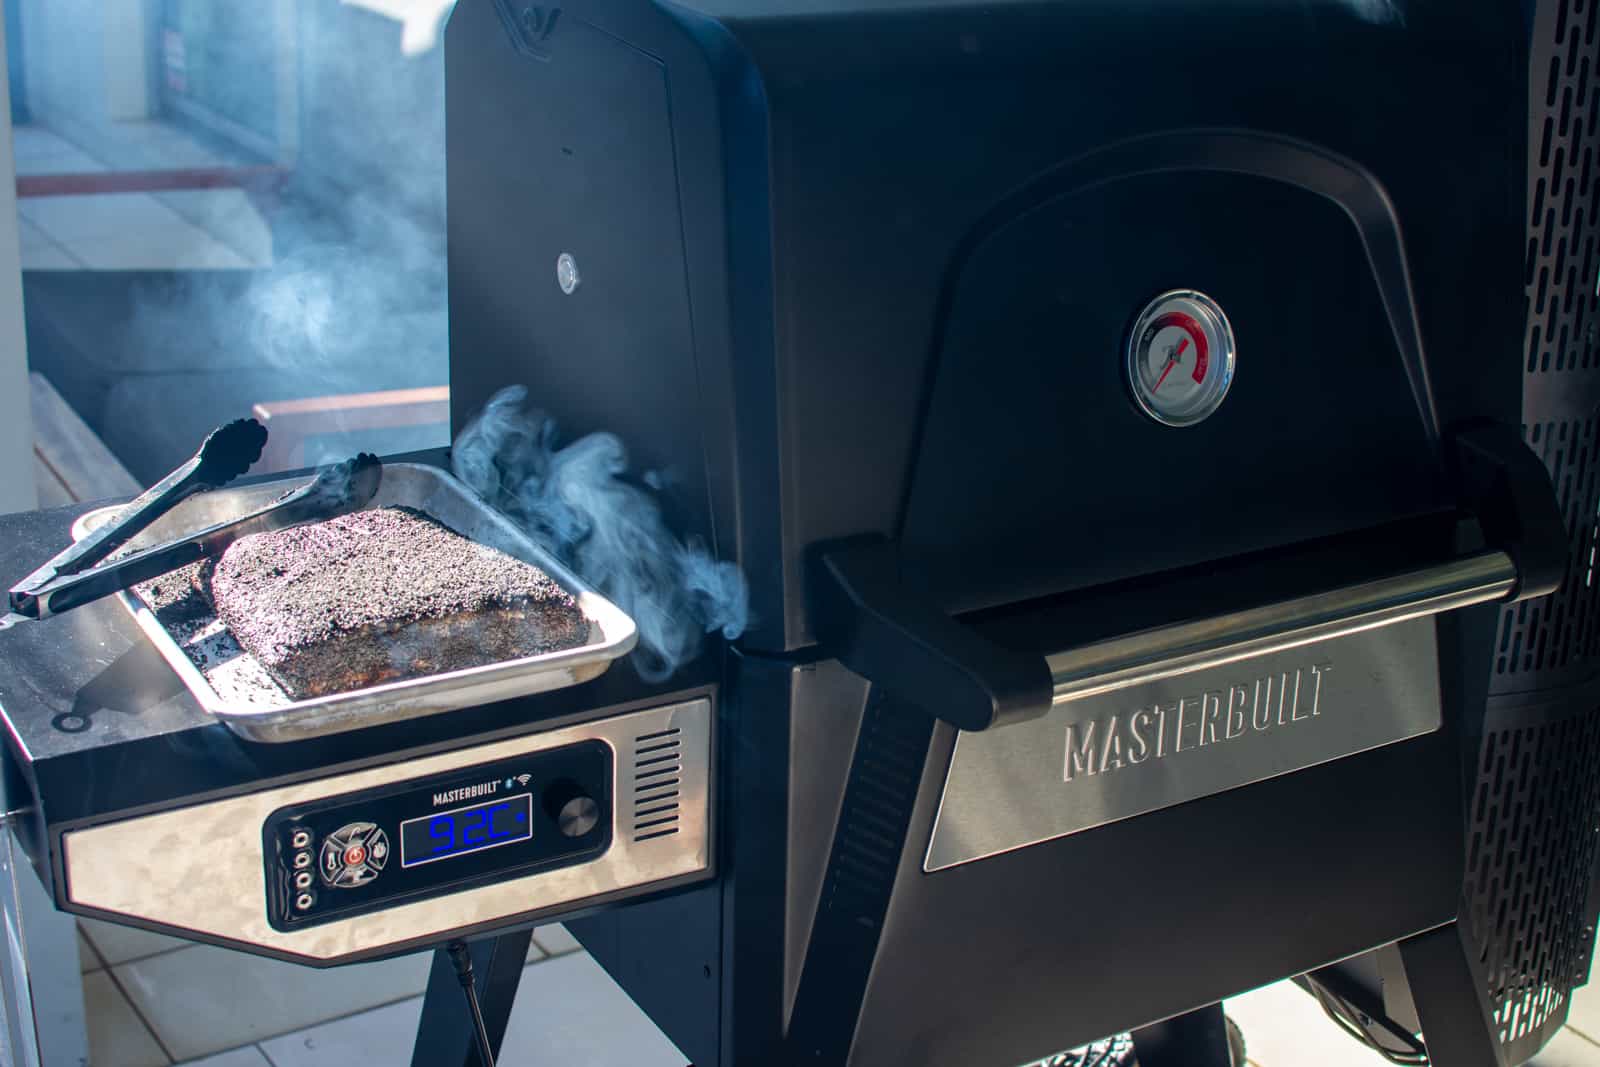 masterbuilt barbecue smoking with beef short ribs next to it